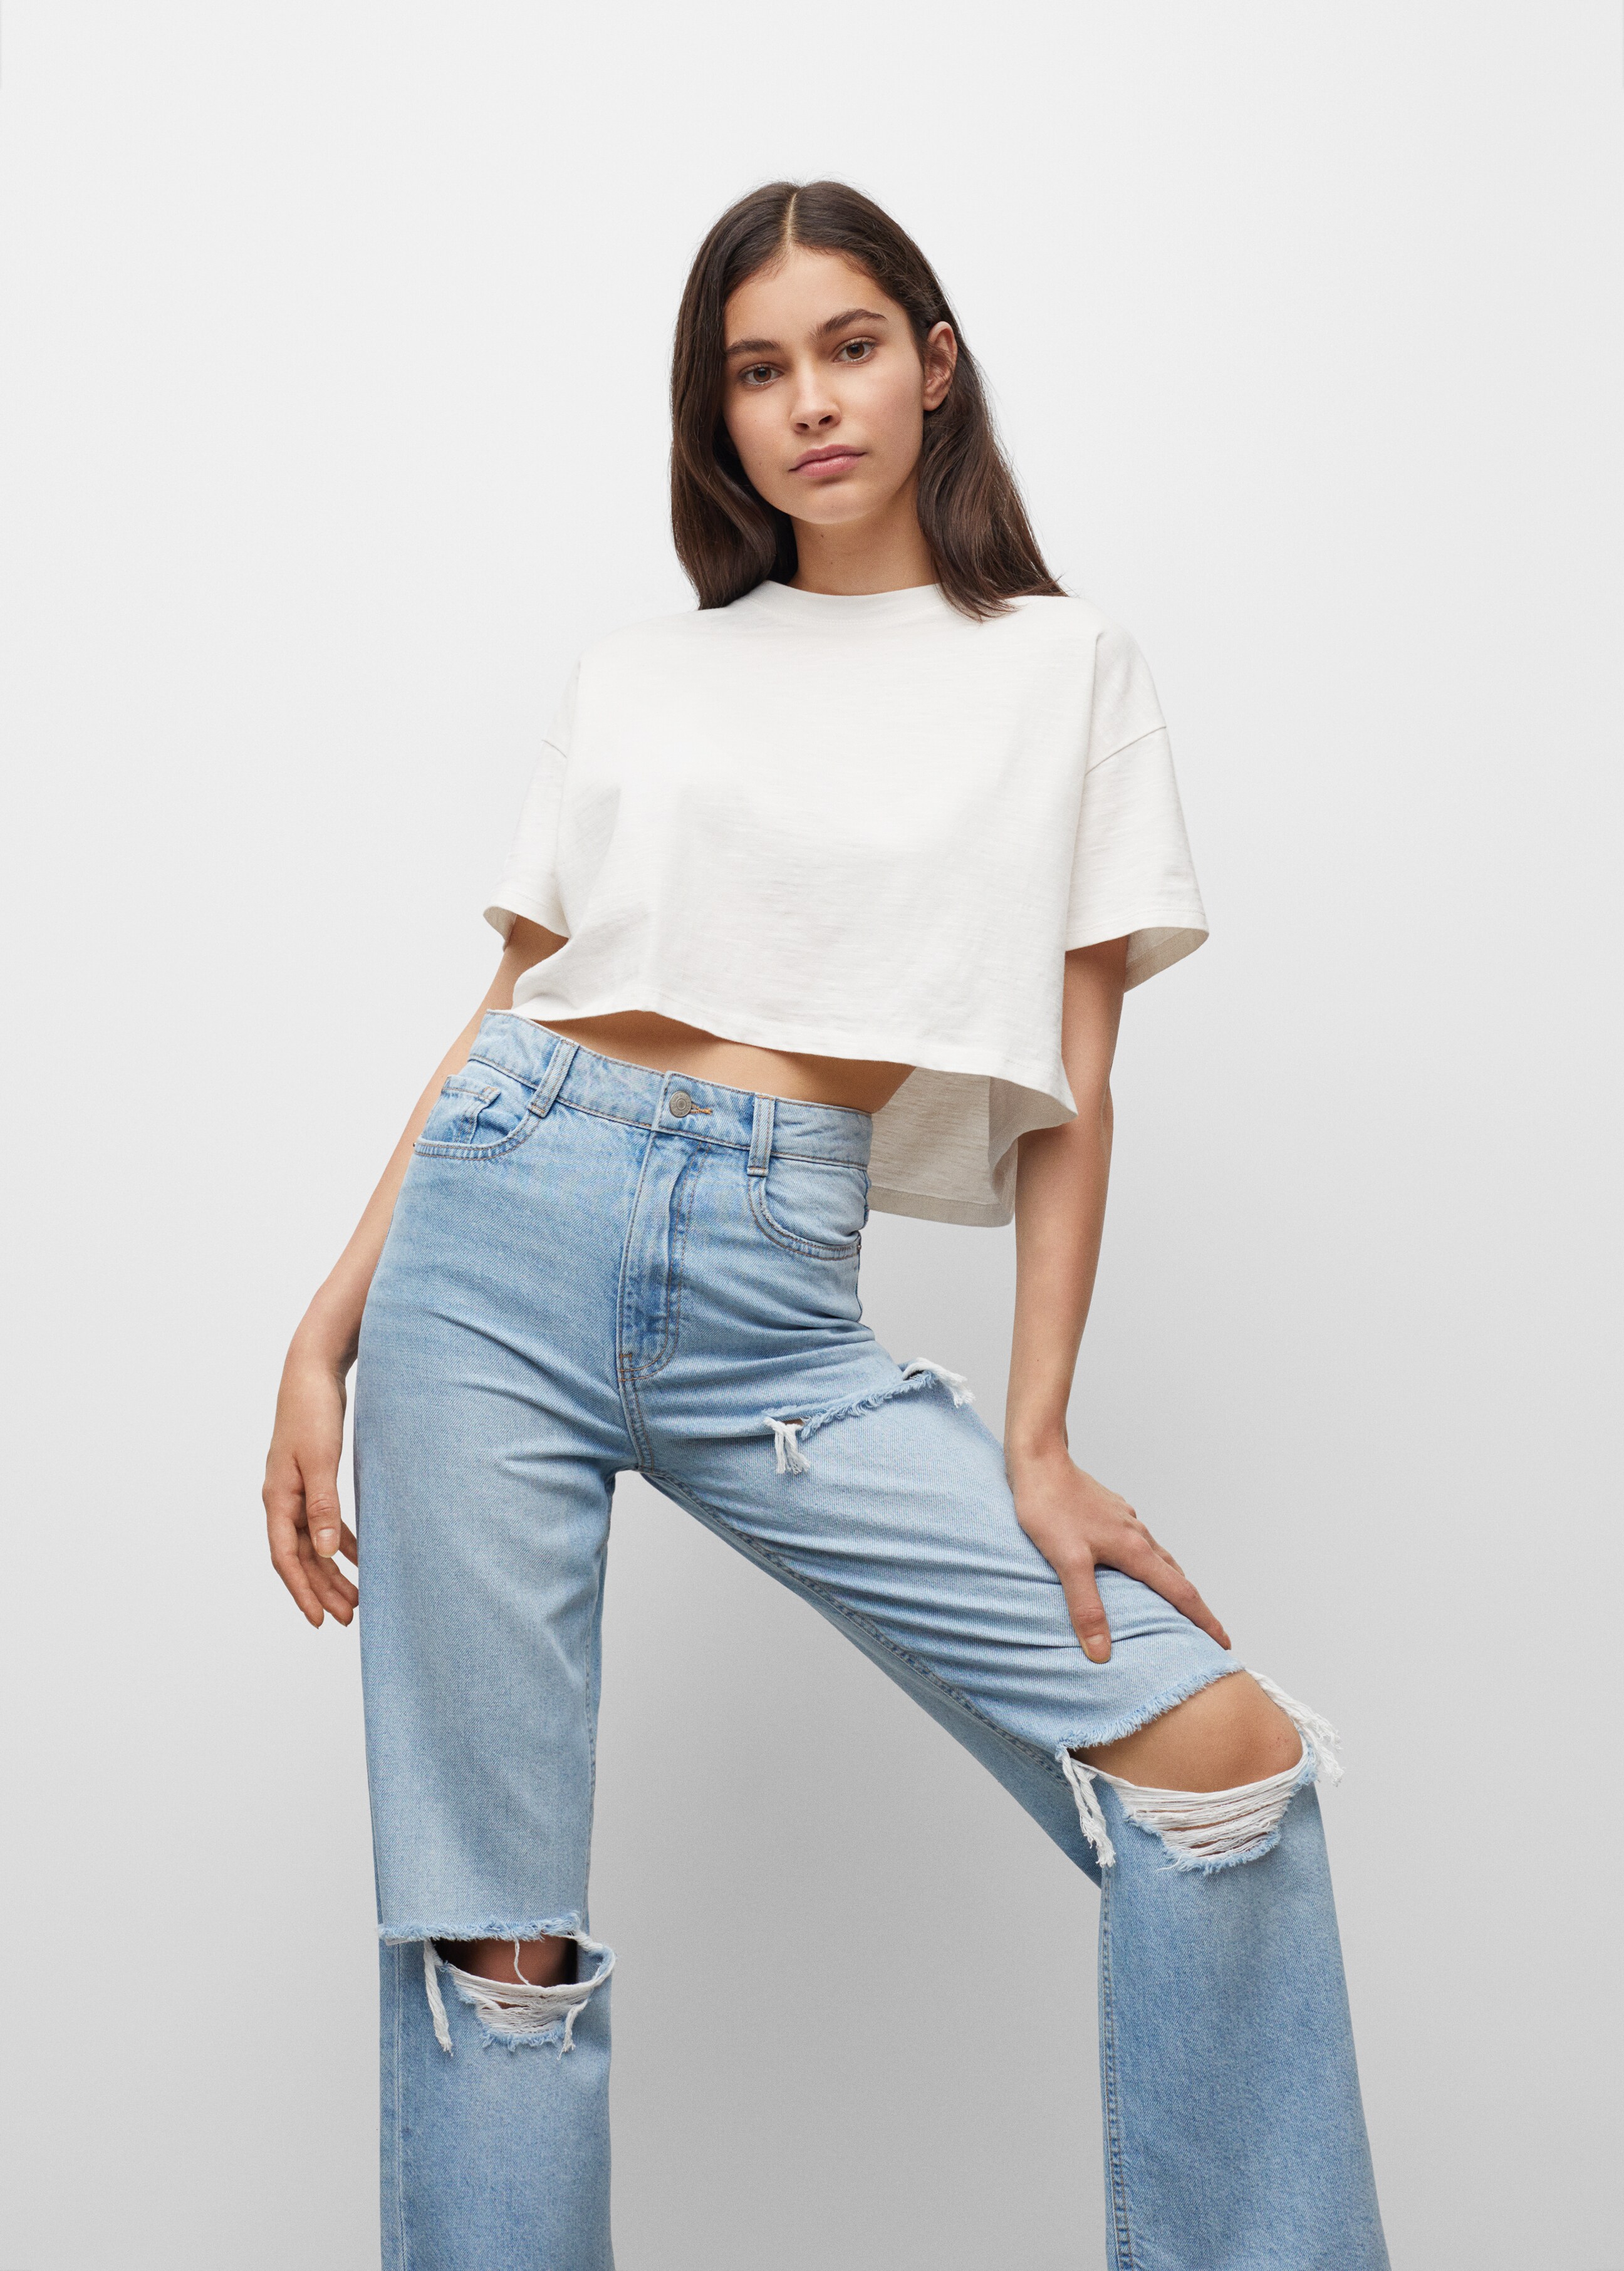 Decorative ripped wideleg jeans - Details of the article 1